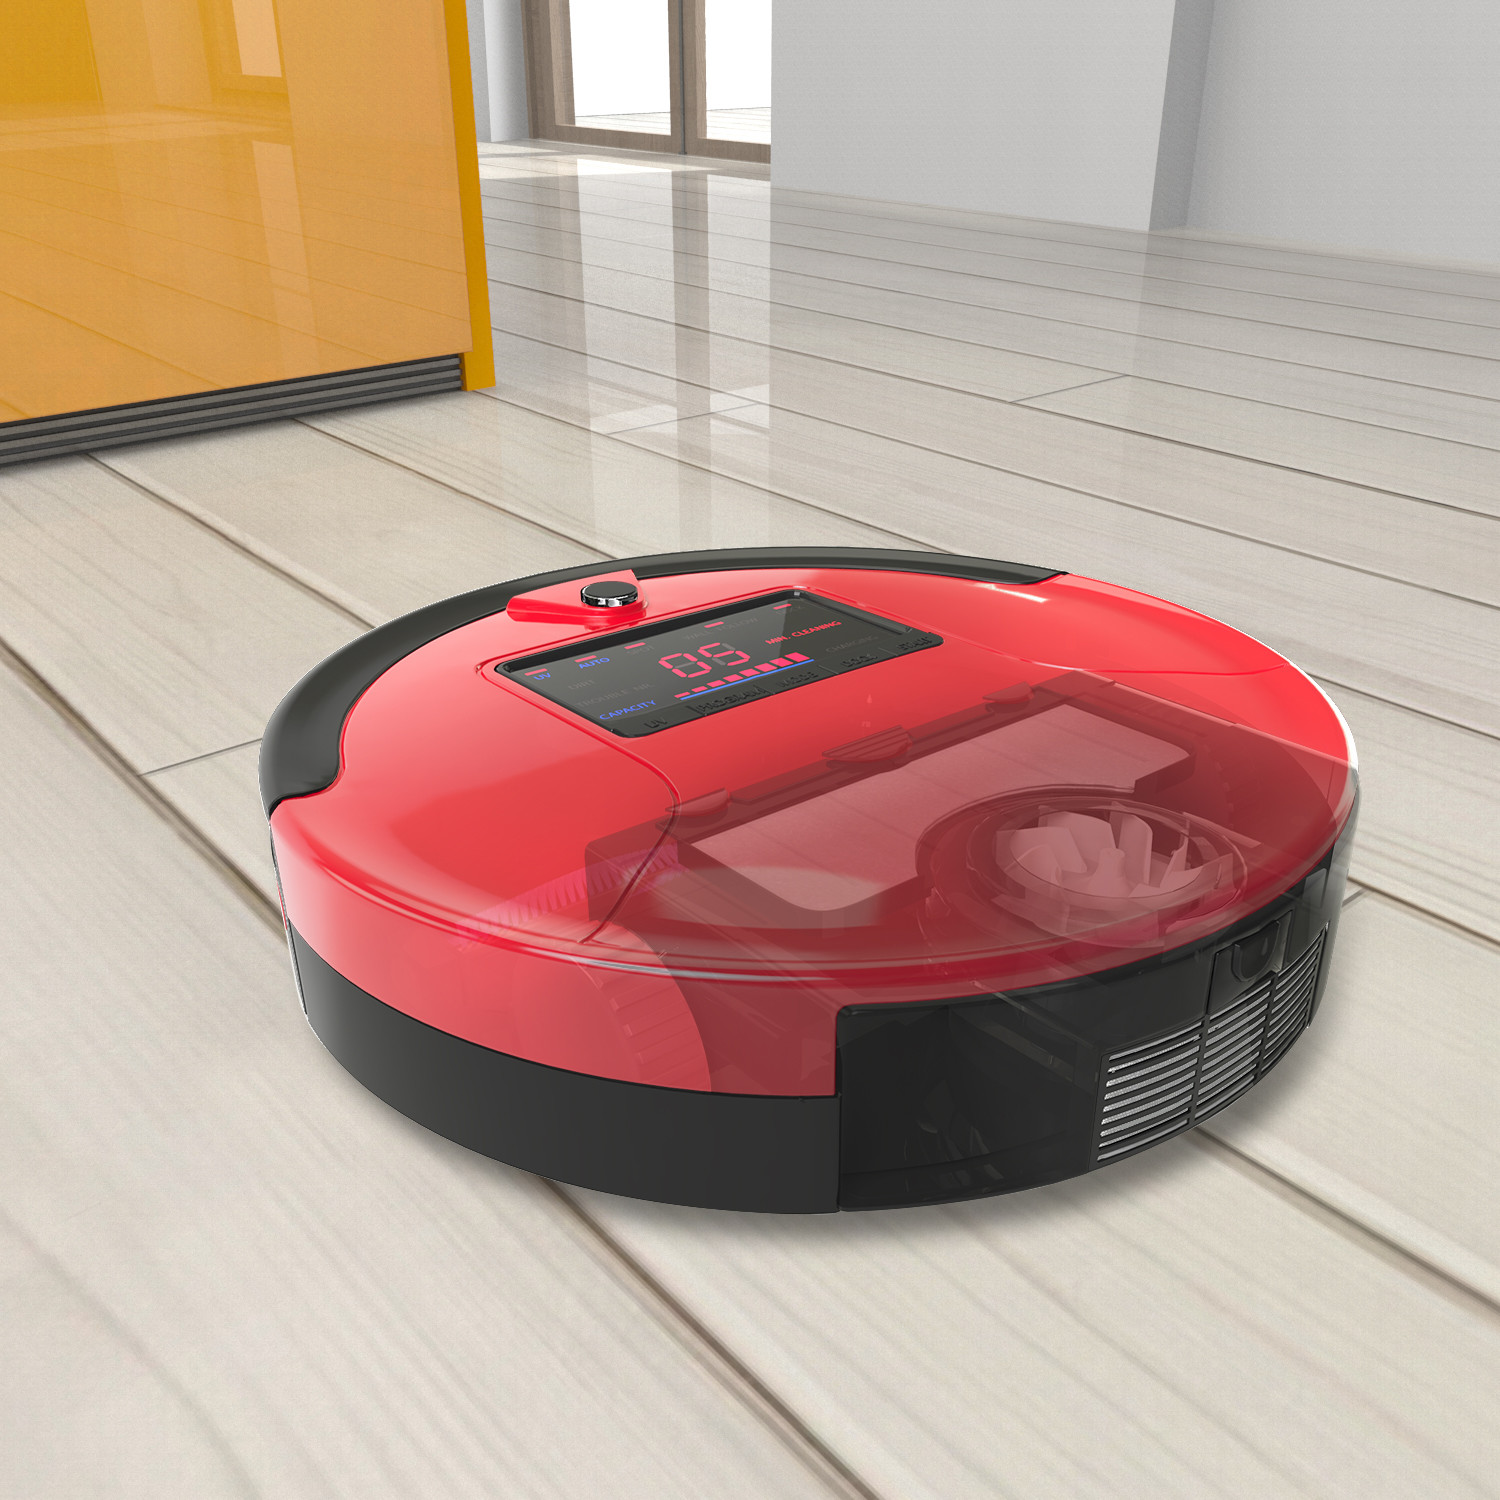 25 Elegant Automatic Vacuum for Hardwood Floors 2024 free download automatic vacuum for hardwood floors of bobsweep bobsweeps dustbin is three times the size of a standard within bobsweep more than just a robot vacuum cleaner